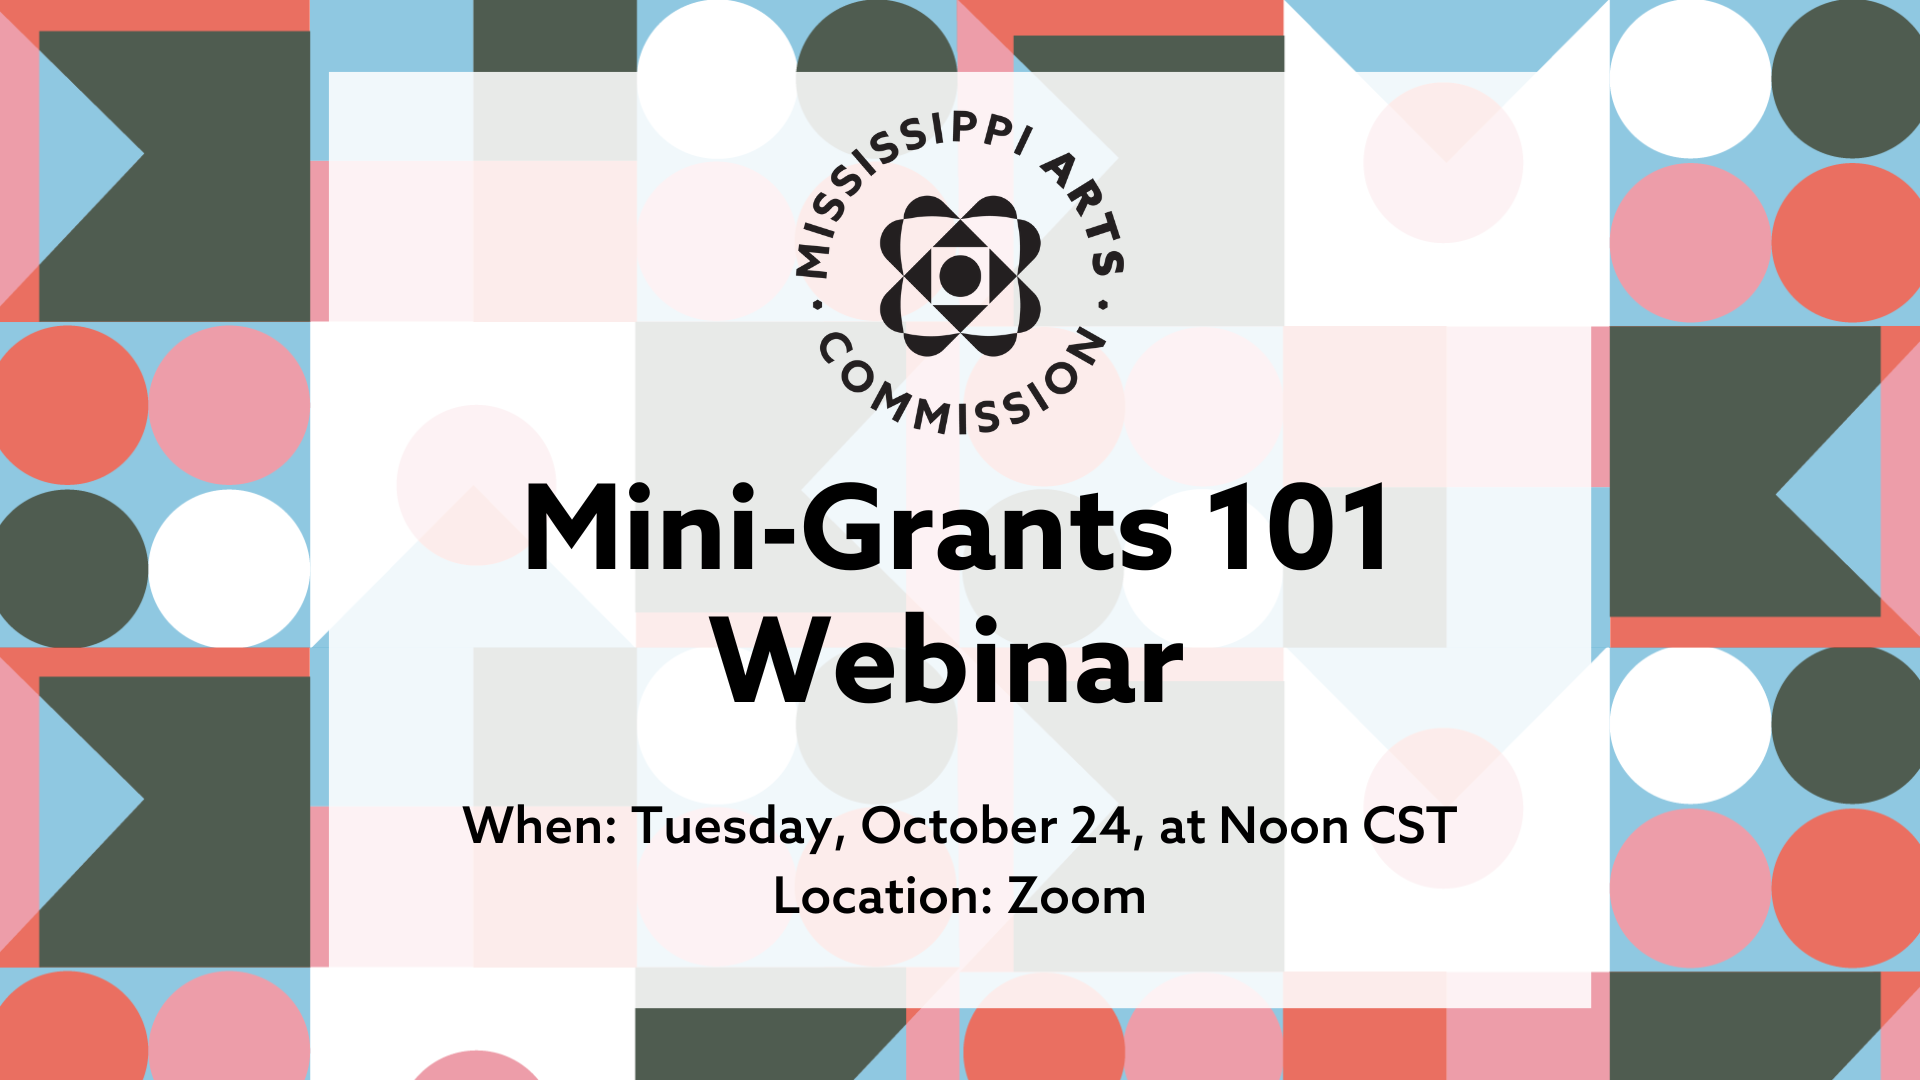 Mini-Grants 101 Webinar When: Tuesday, October 24, at Noon CST Location: Zoom